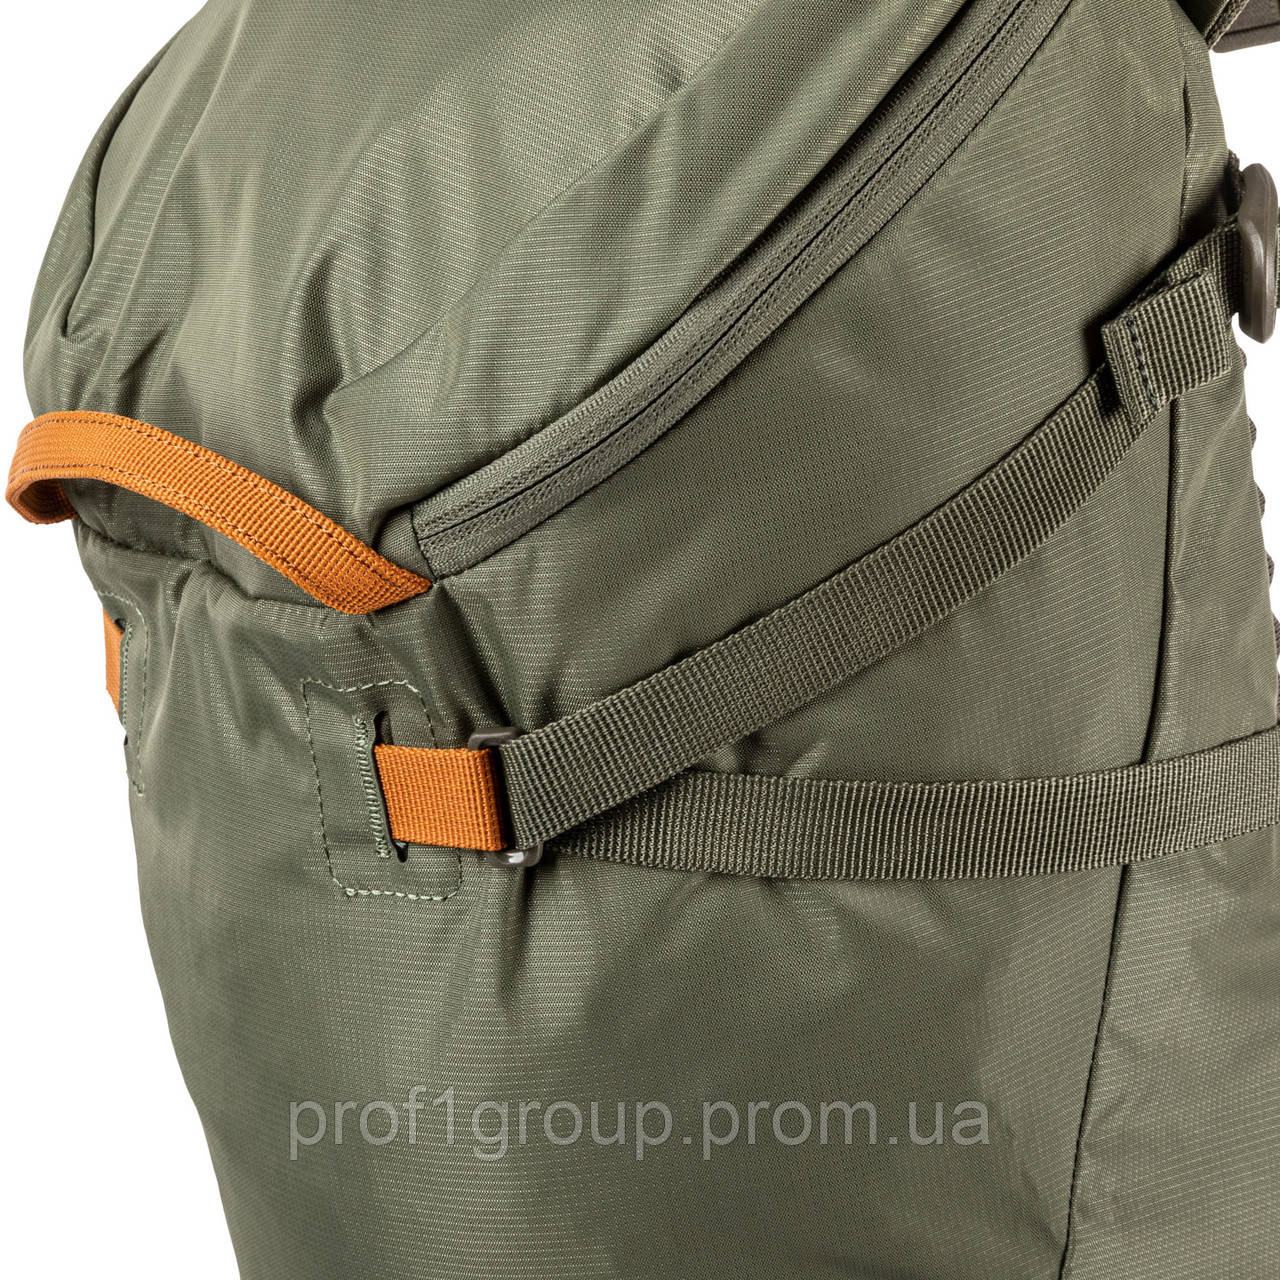 5.11 Tactical Skyweight Survival Chest Pack Major Brown